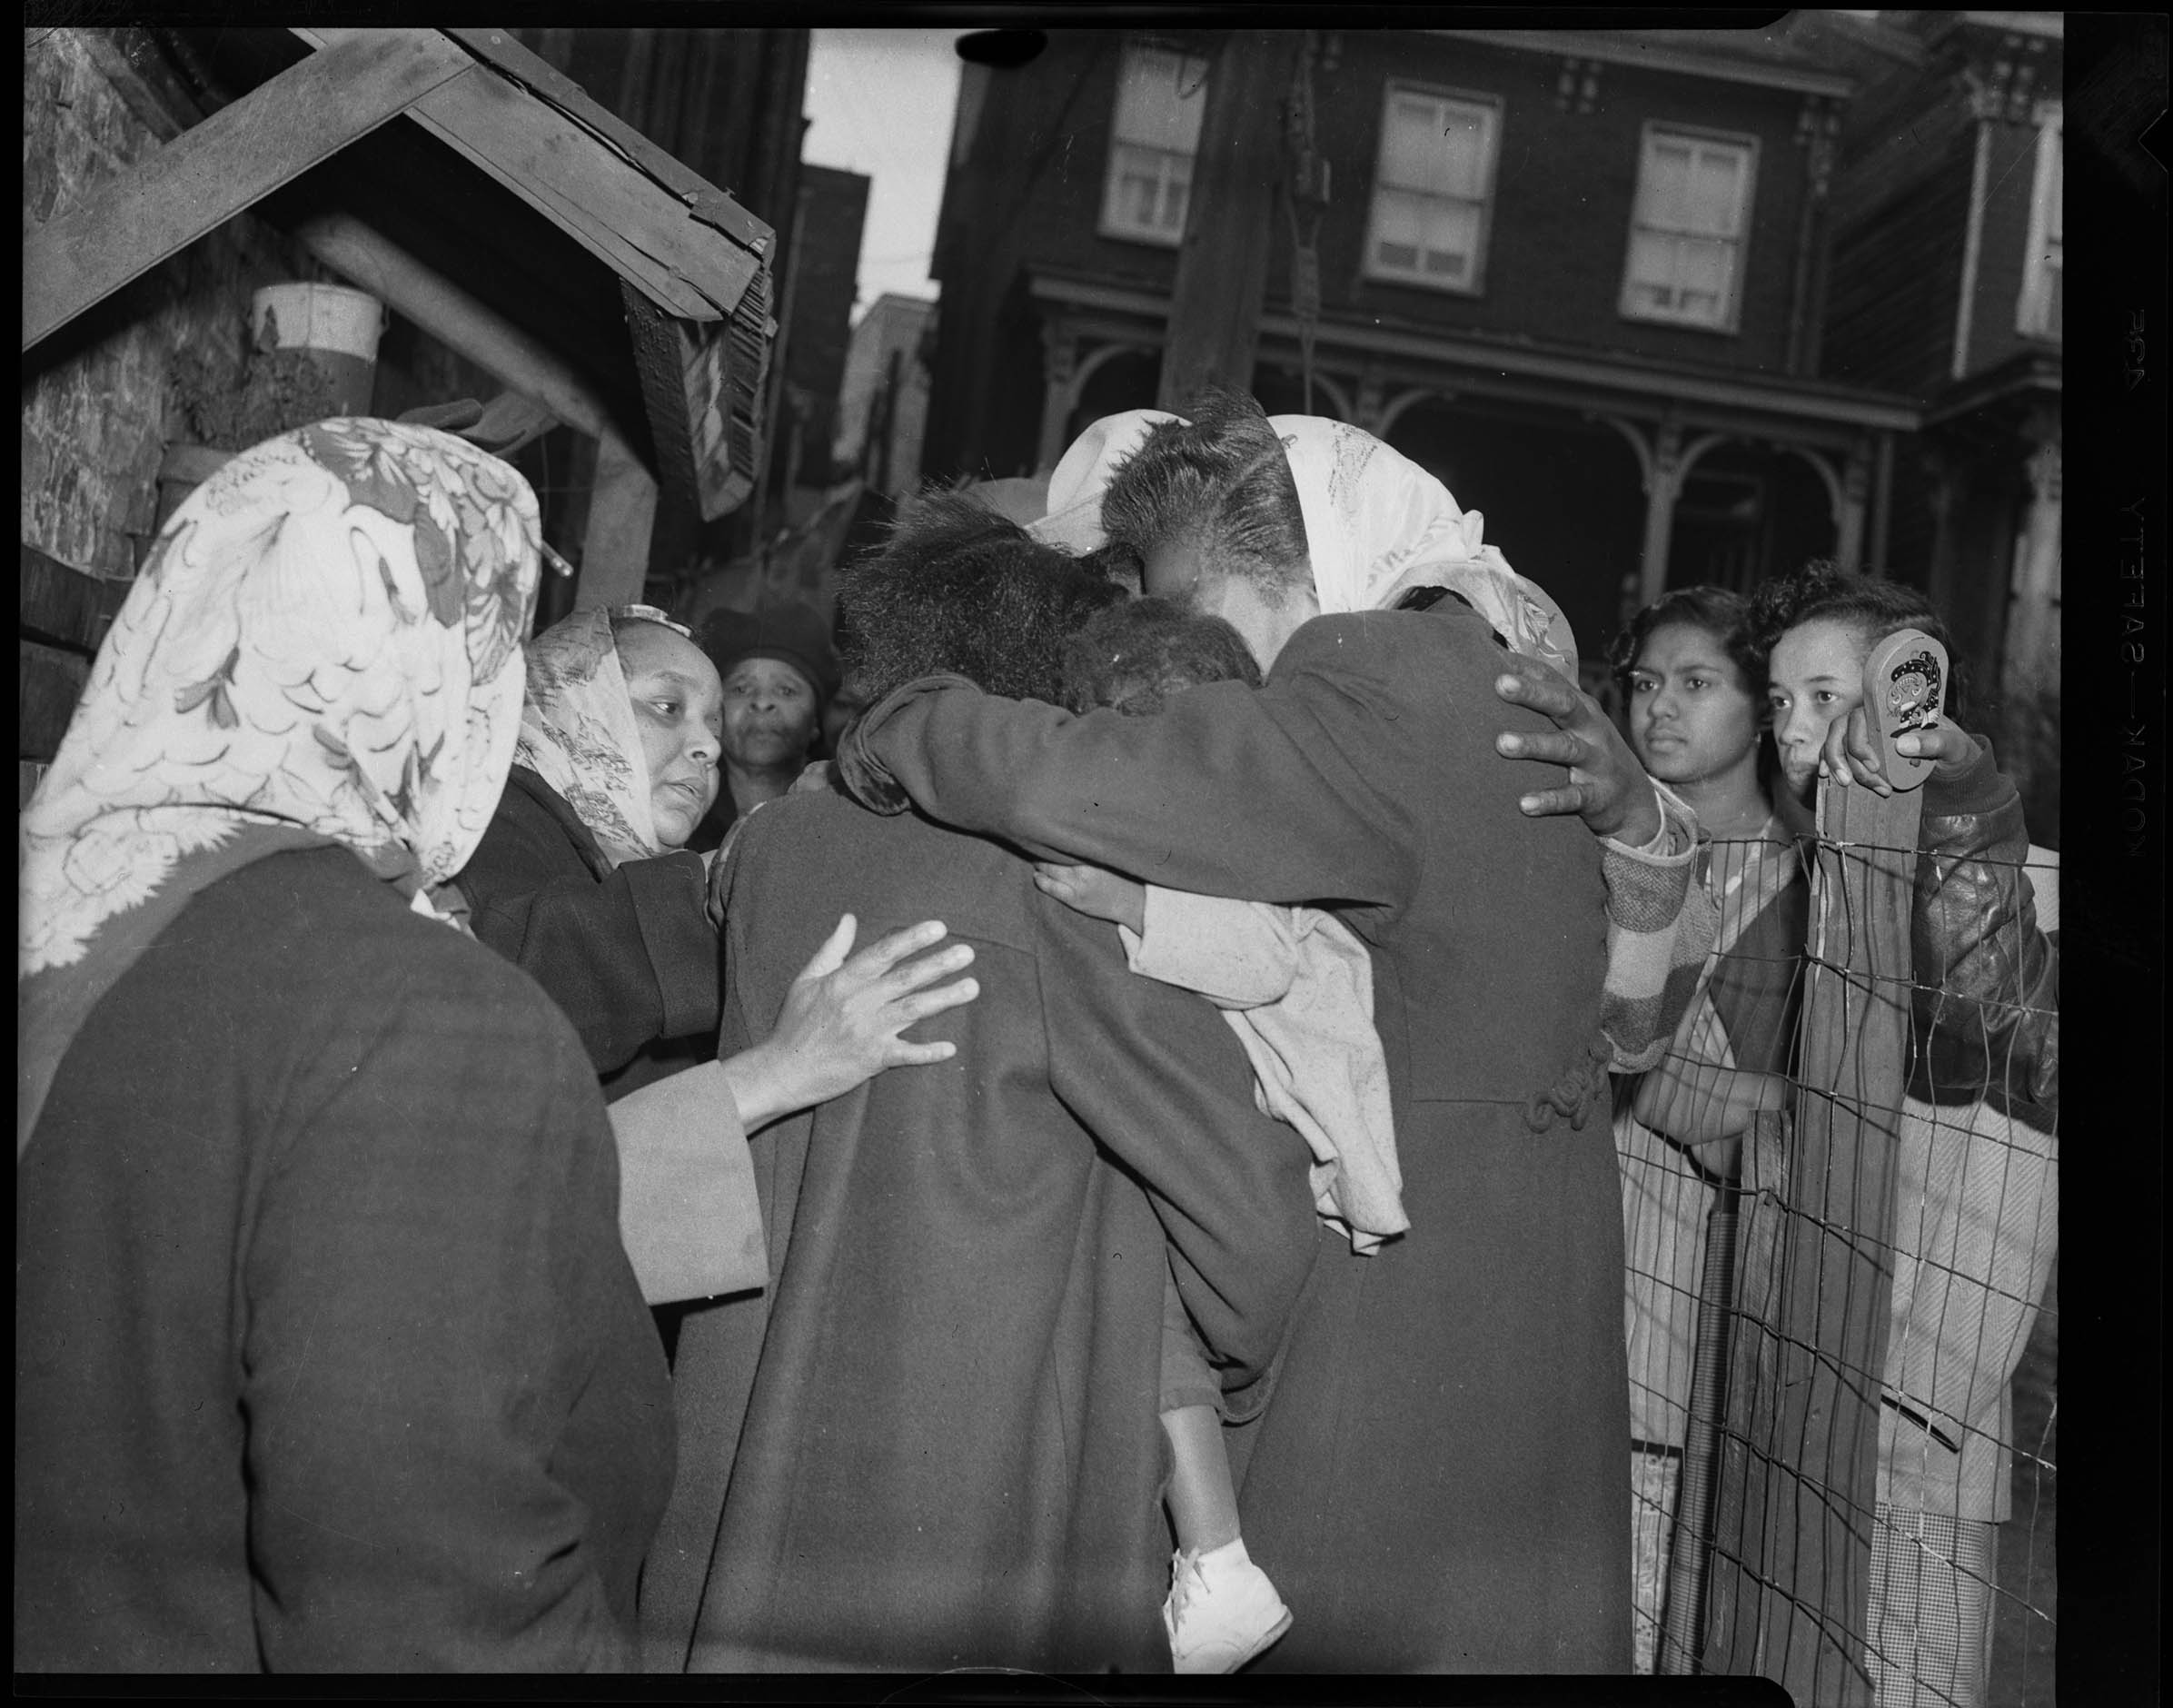 People embracing with buildings and several bystanders in background. The bystanders look concerned and upset.